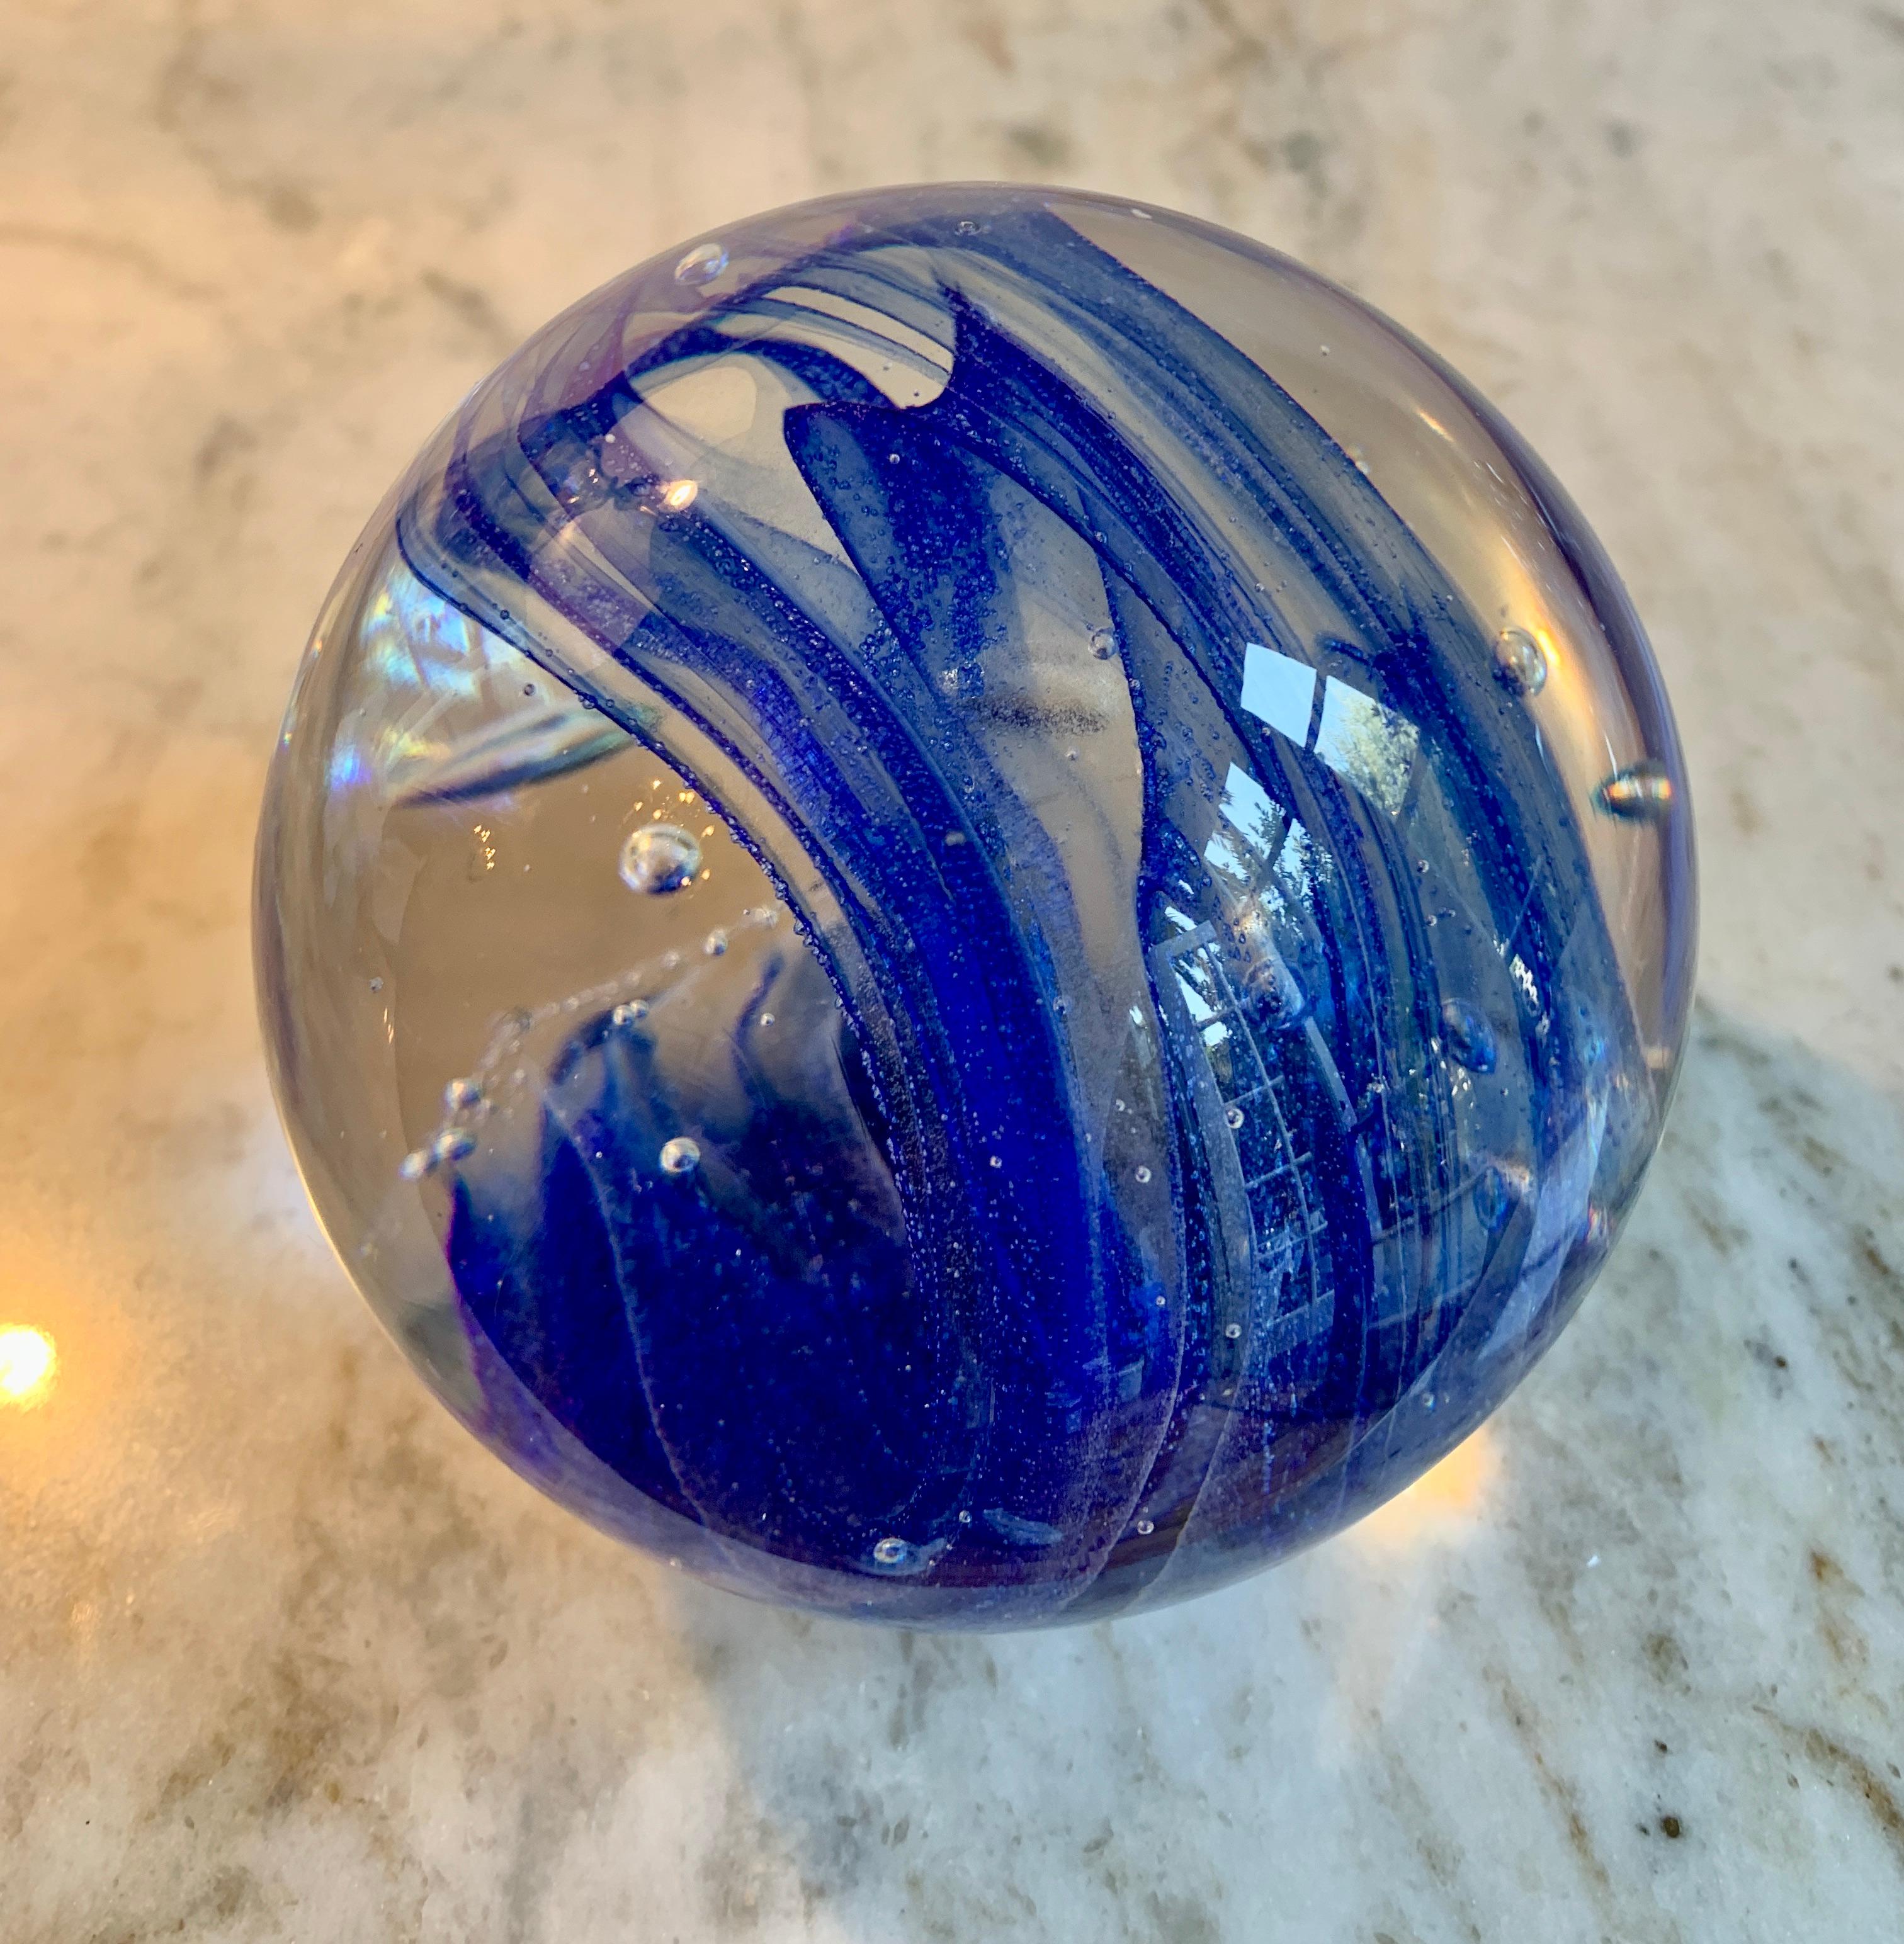 Paper weight for the sophisticated desk - Italian blue wave inside Murano art glass sphere. A compliment to any desk.